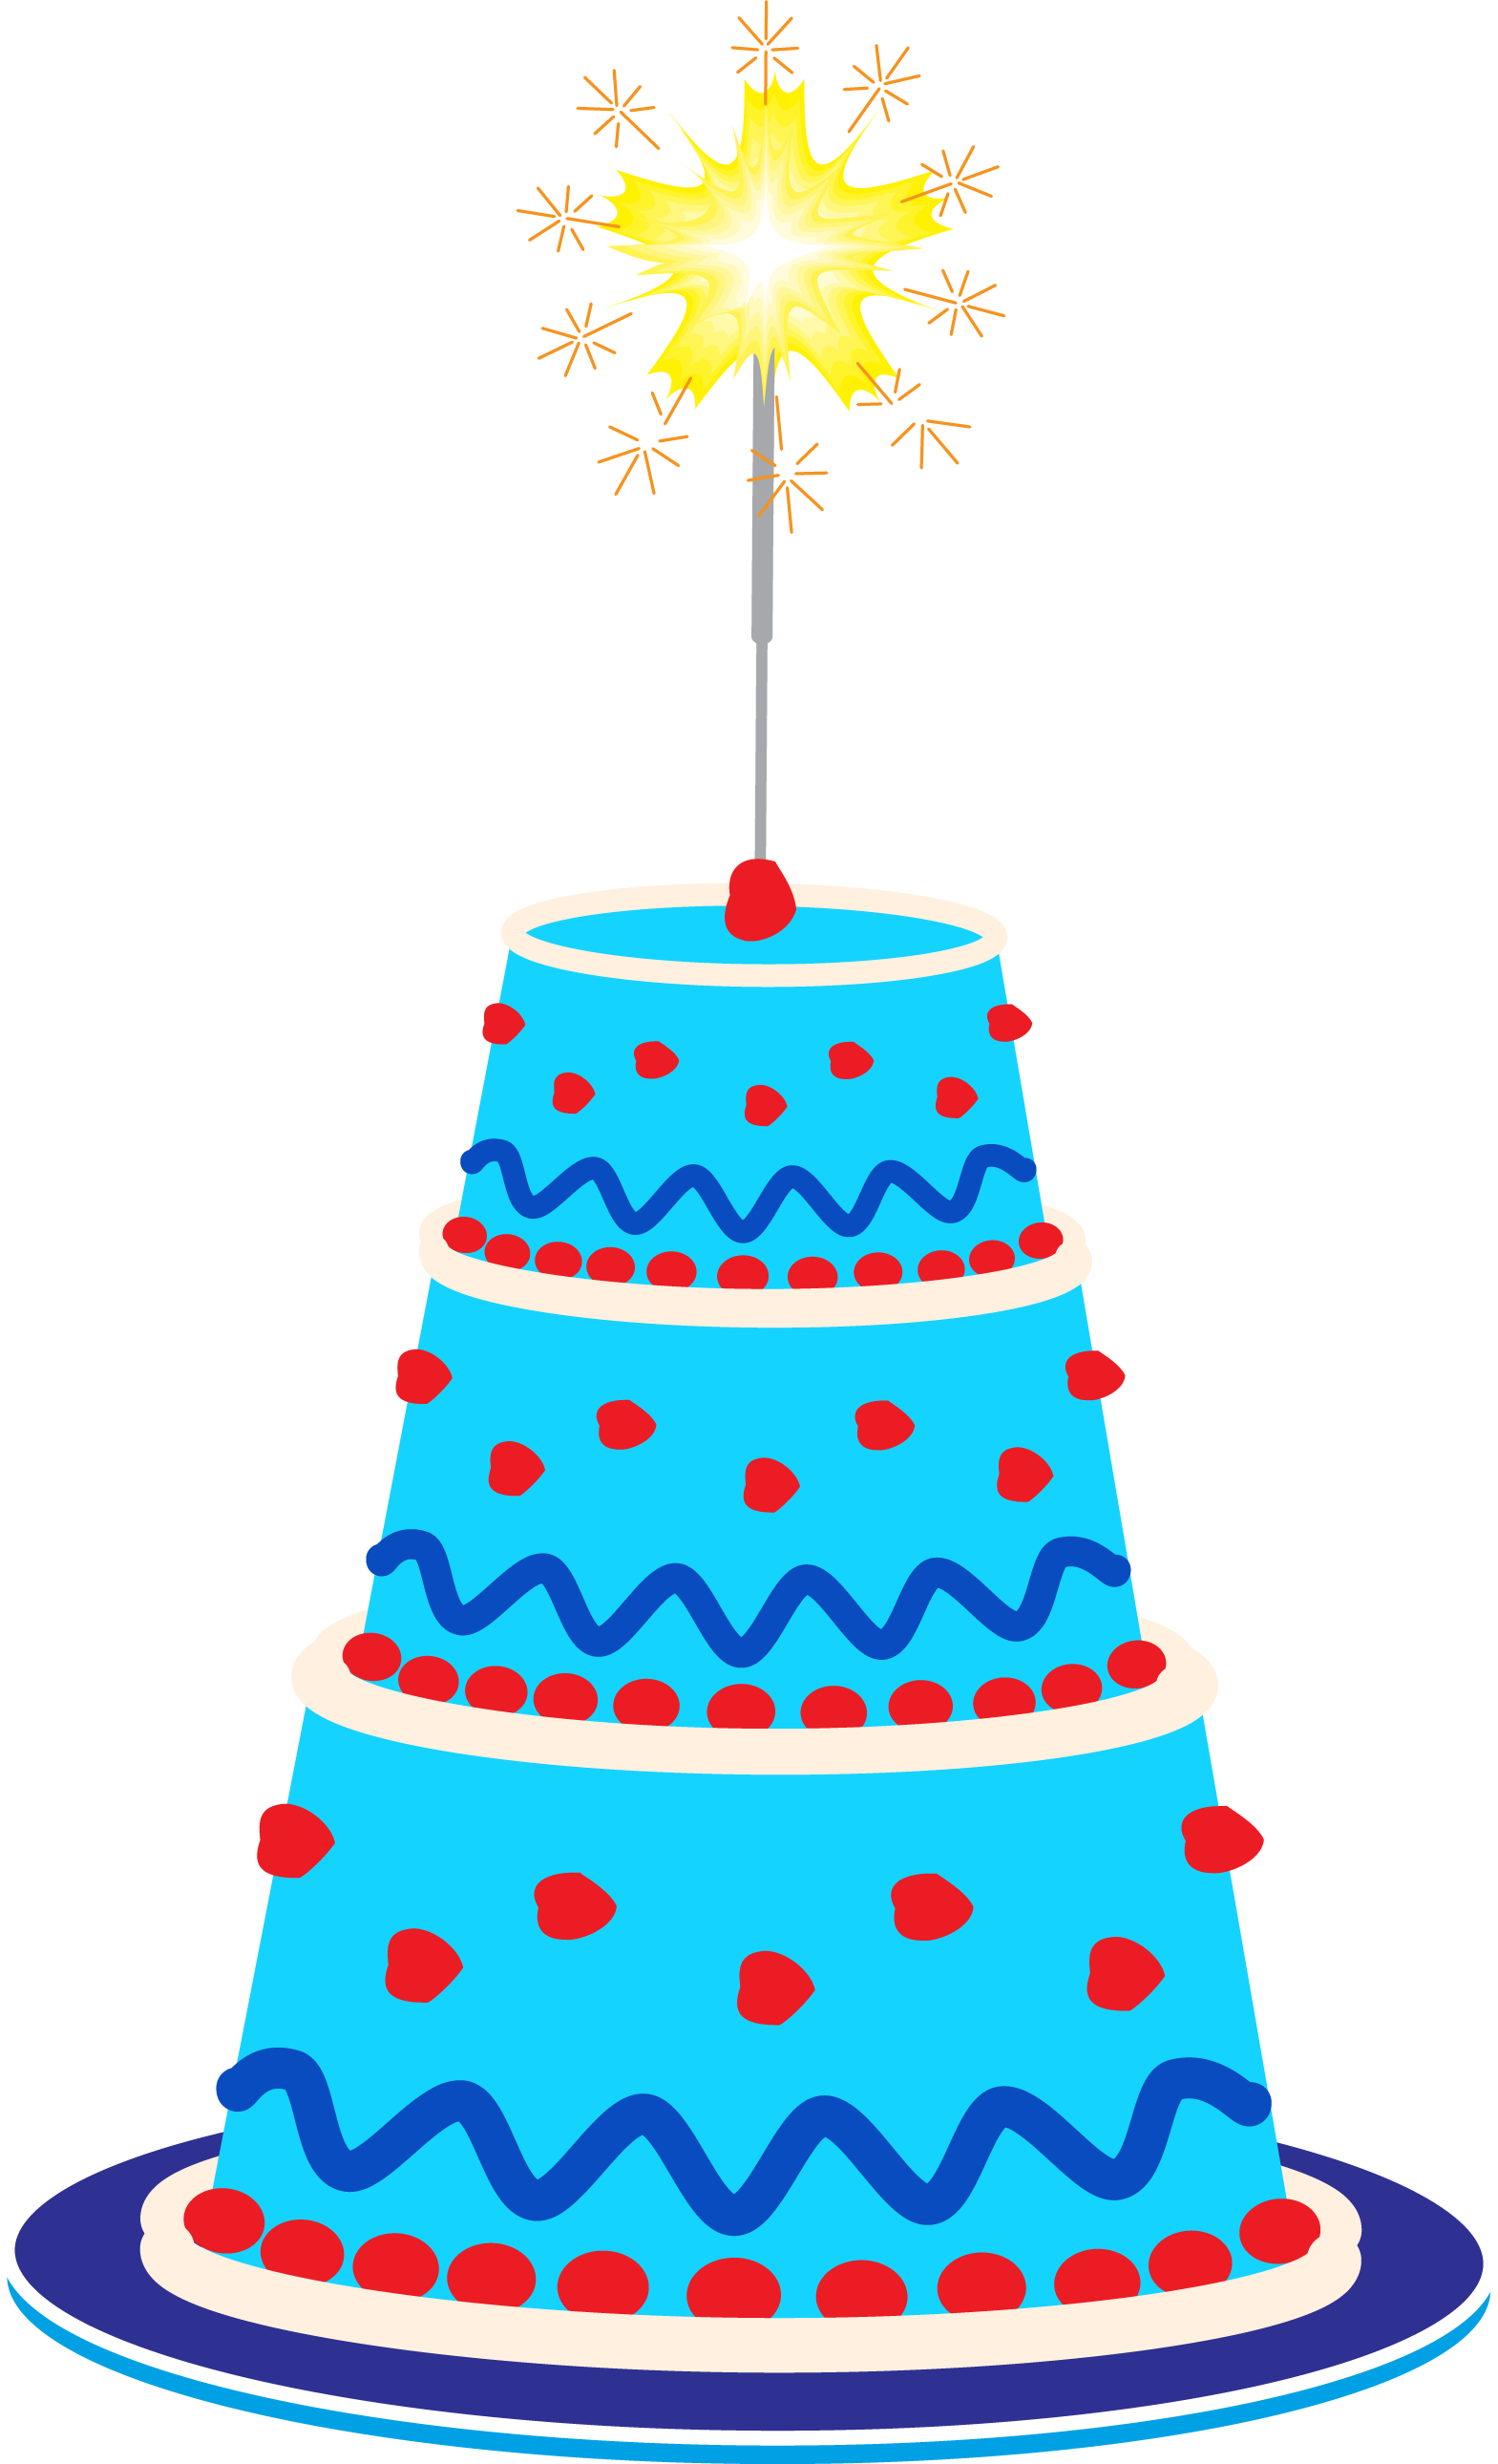 Free Clipart Cake And Sparkler - Free Clipart Cake And Sparkler (1569x2580)